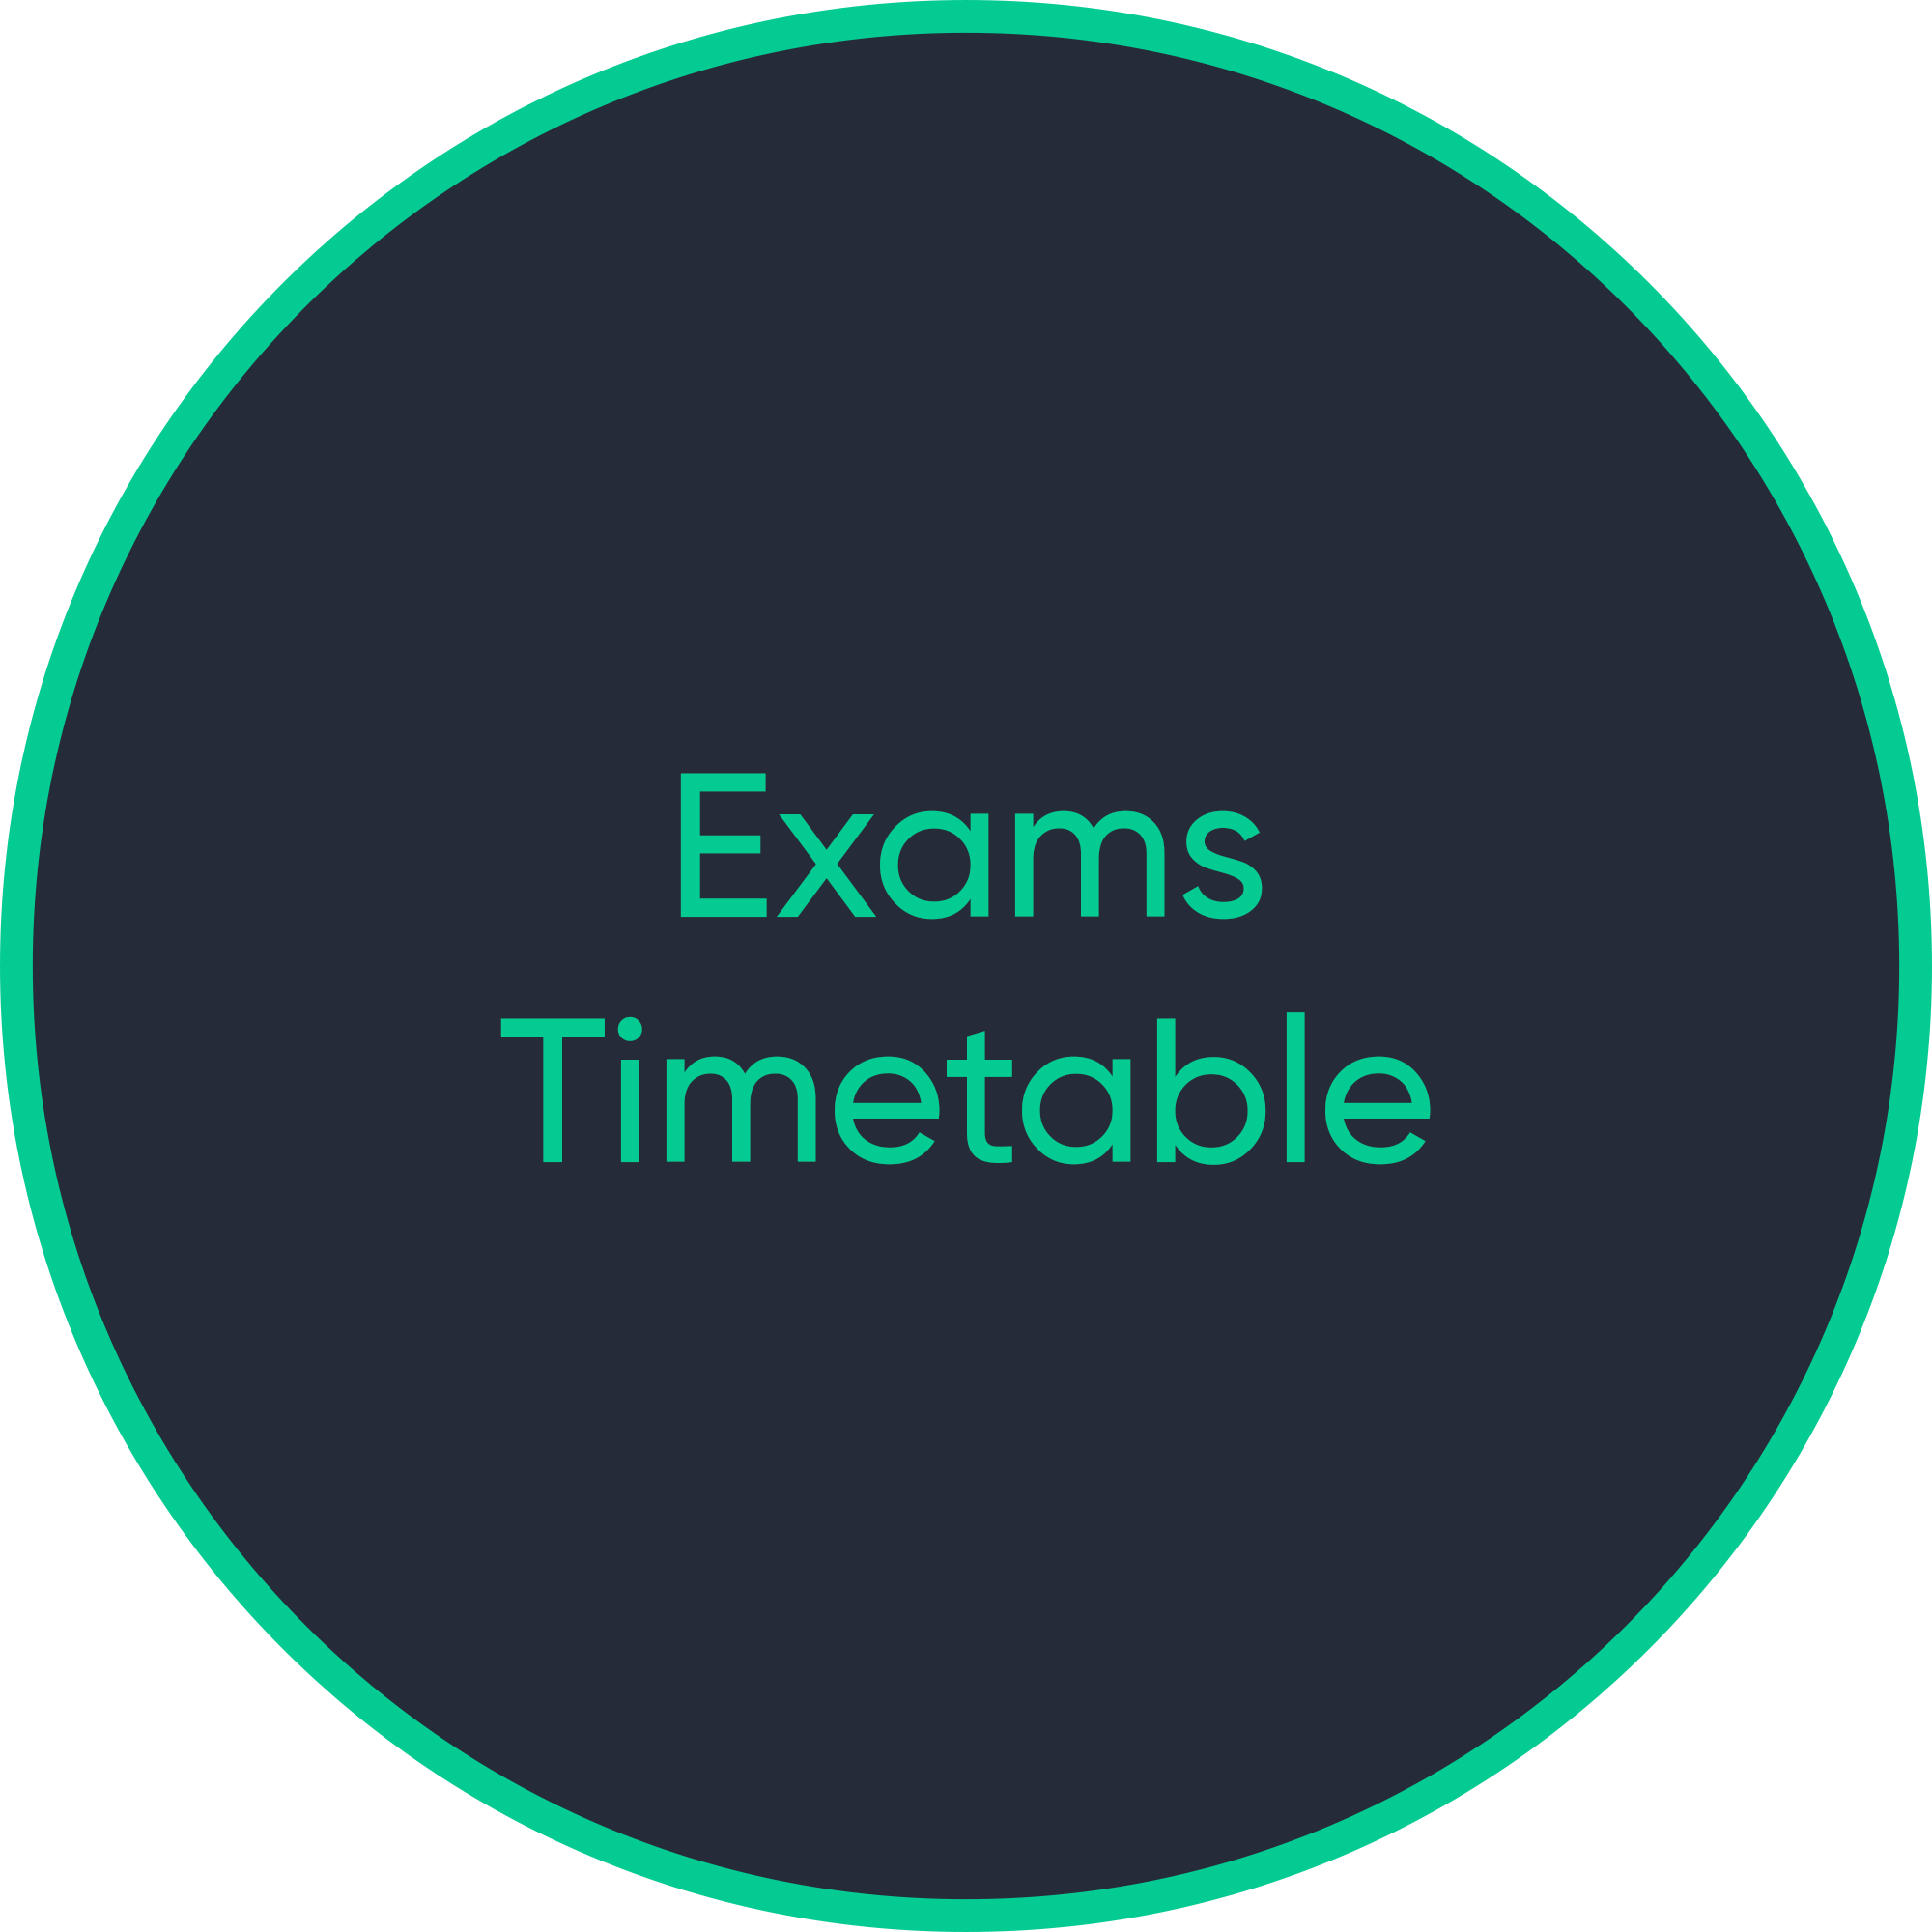 Detailed information regarding the exam time table  can be found here